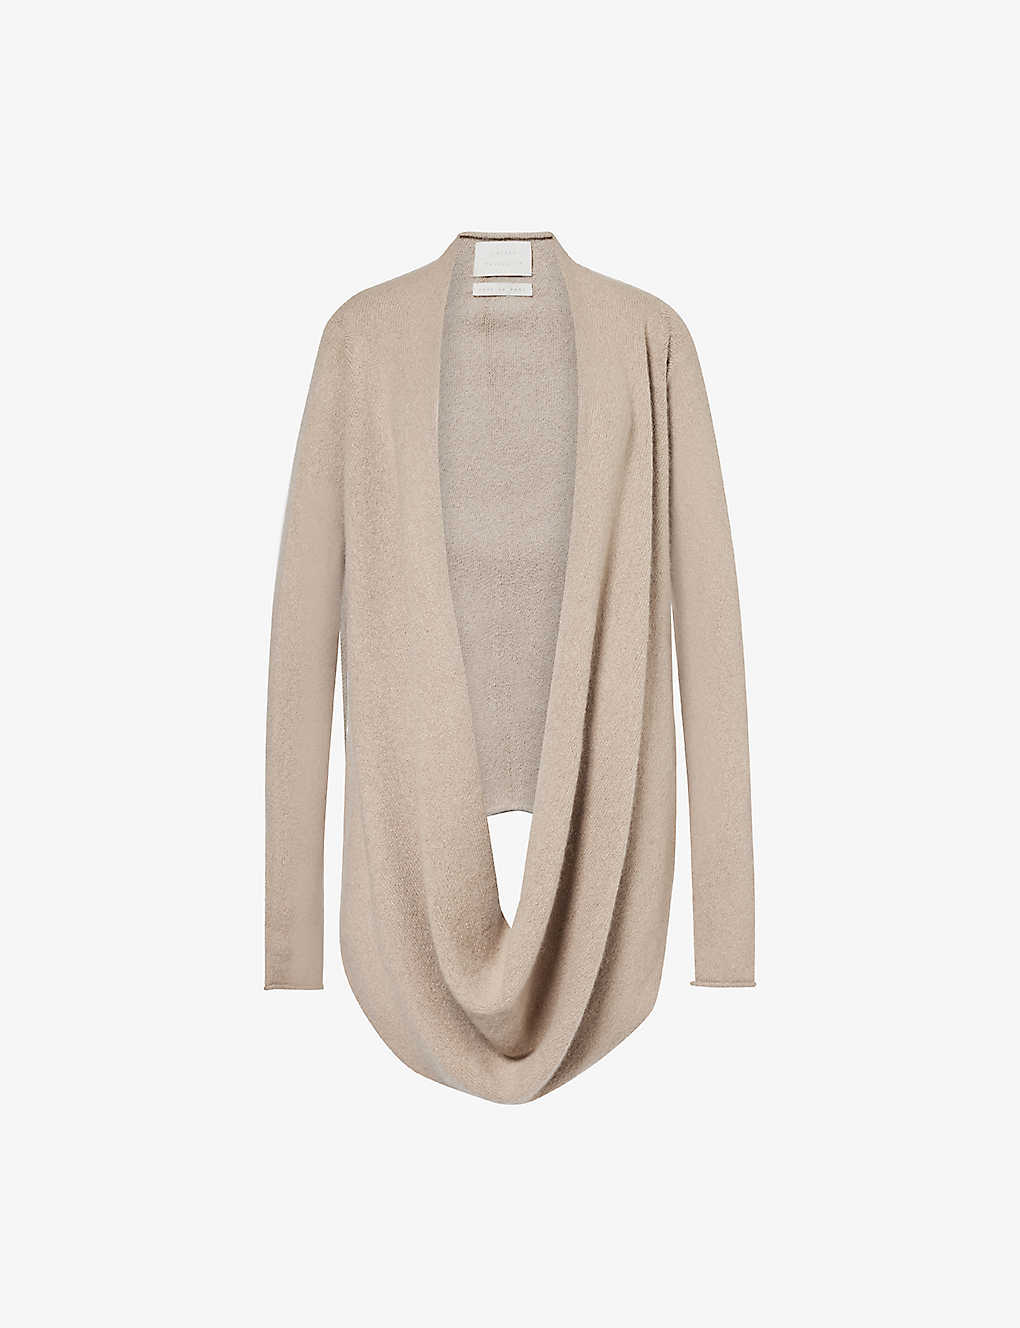 Lauren Manoogian Womens Stoneware Mobius Cashmere And Alpaca Wool-blend Knitted Cardigan